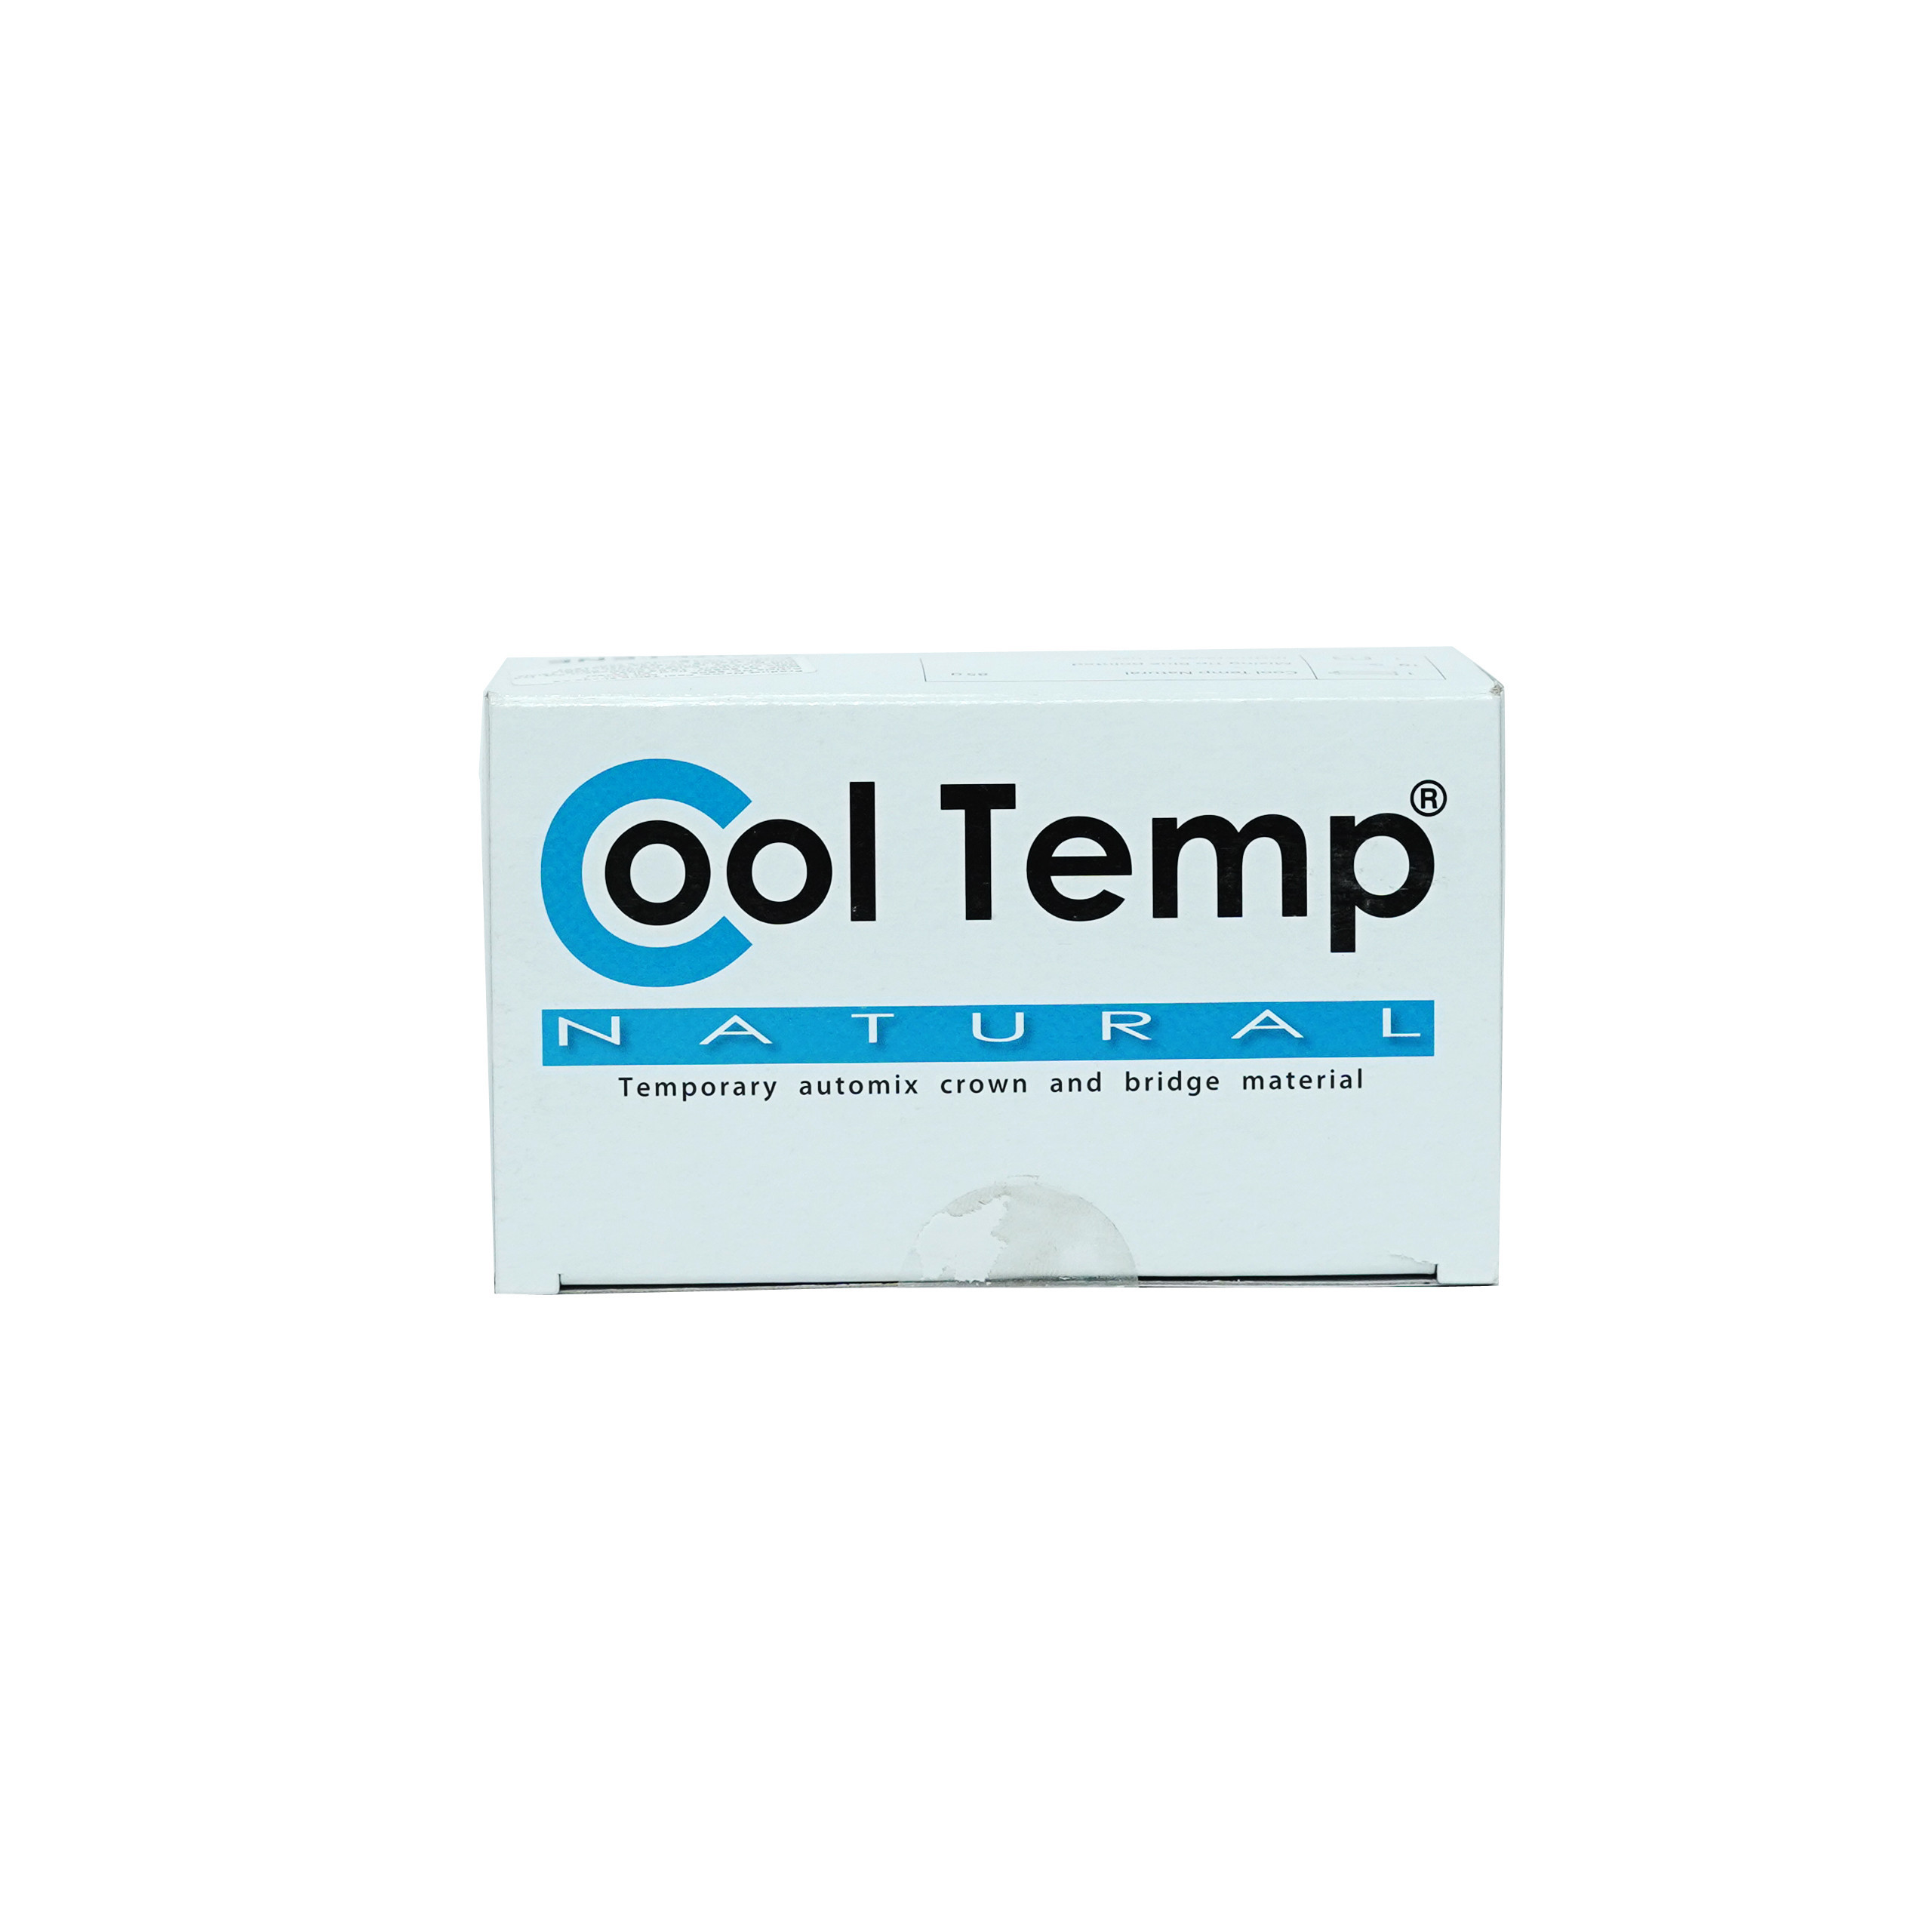 Coltene Cool Temp Natural Shade A1, Cartridge 1 X 50ml, 85 Gms, Mixing Tips Blue Pointed- 10 Pcs